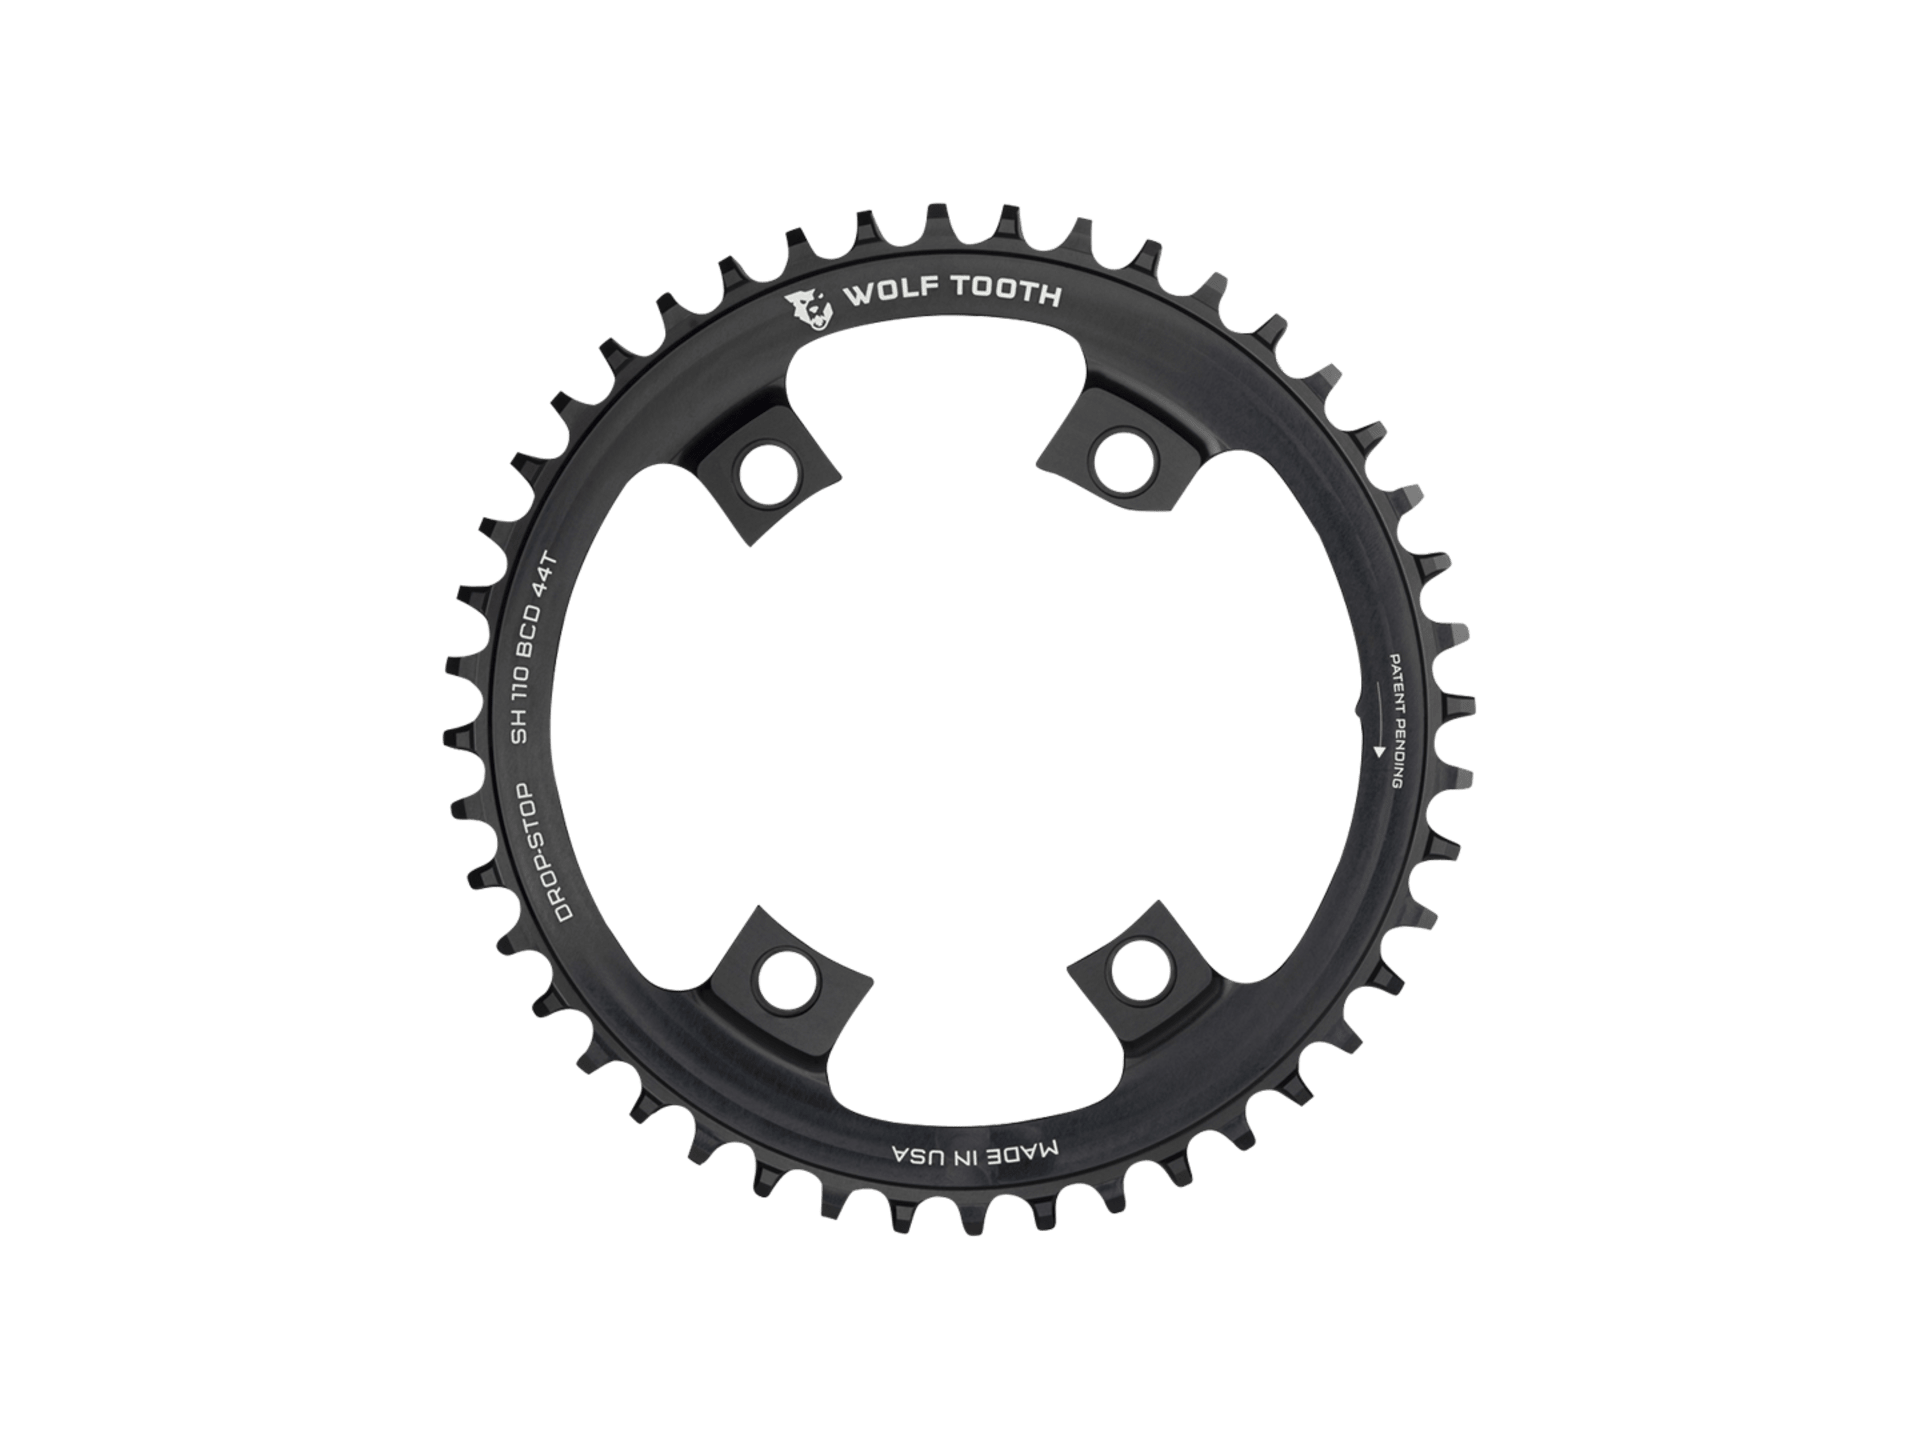 Wolf Tooth Drop-Stop 110 Asymmetric Chainring